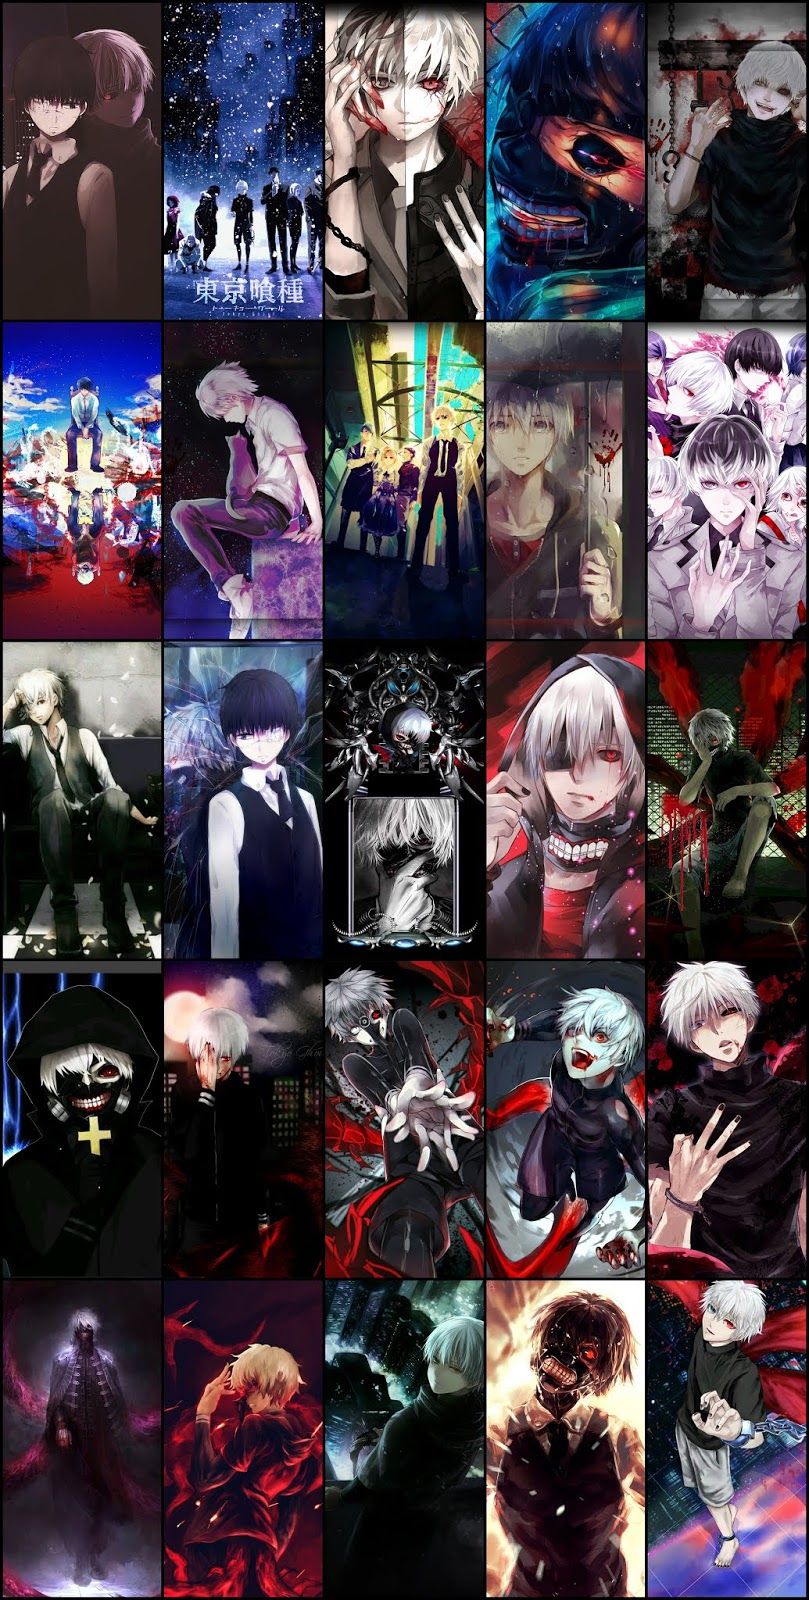 Tokyo Ghoul Wallpaper Pack For Mobile Phone Part 01 Tokyo 809x1600